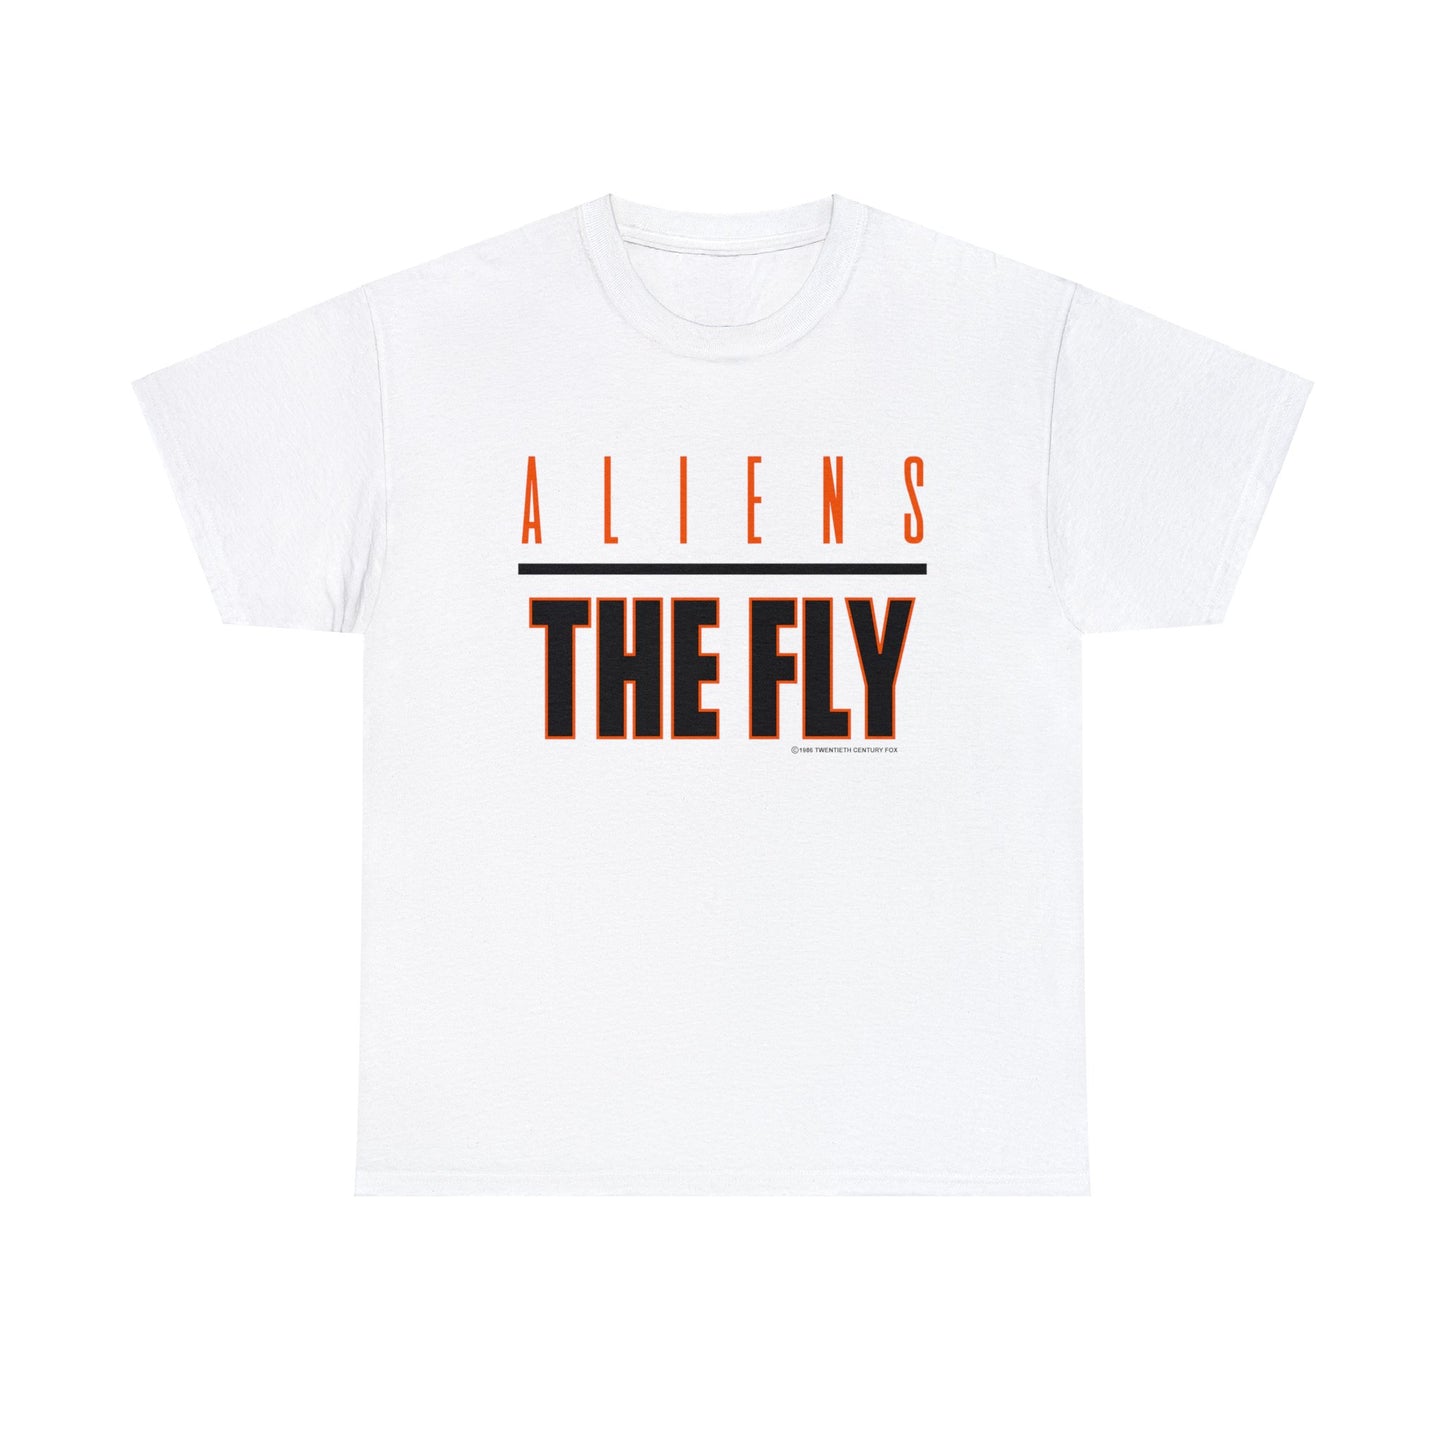 ALIENS & THE FLY MOVIE Halloween Horrorcult 1986 T-shirt for Sale